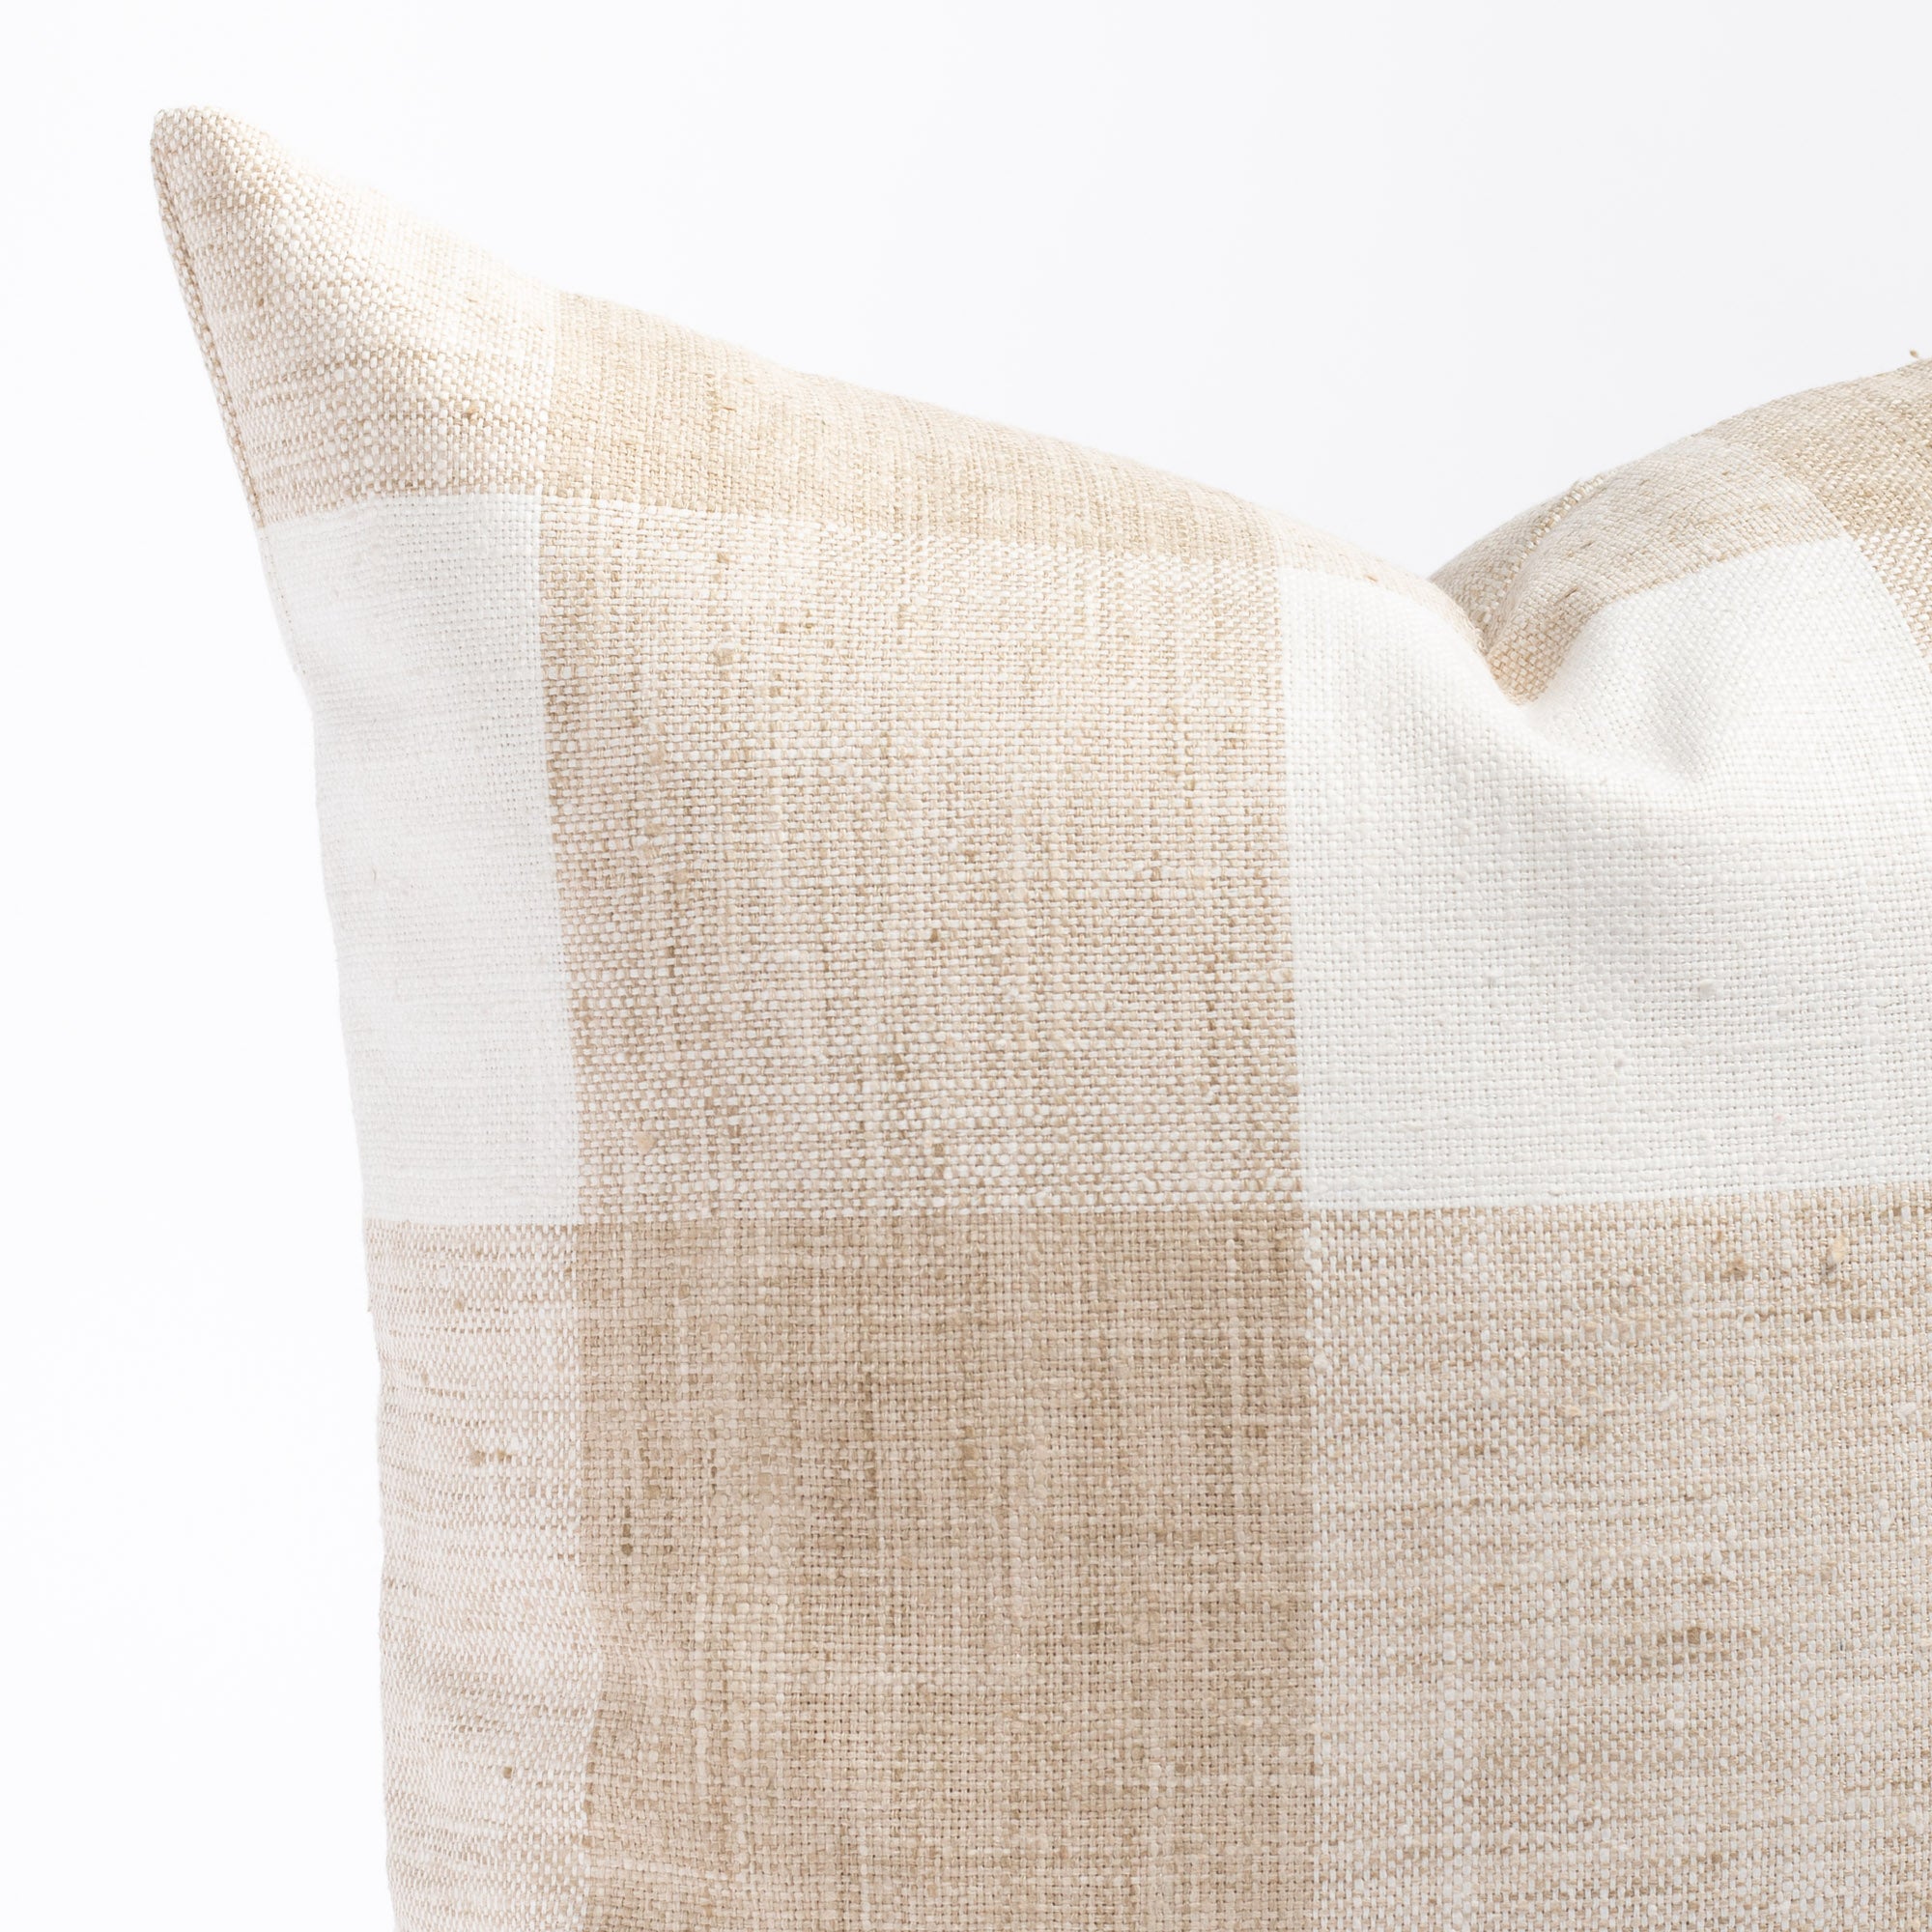 a white and beige buffalo check patterned throw pillow : close up view